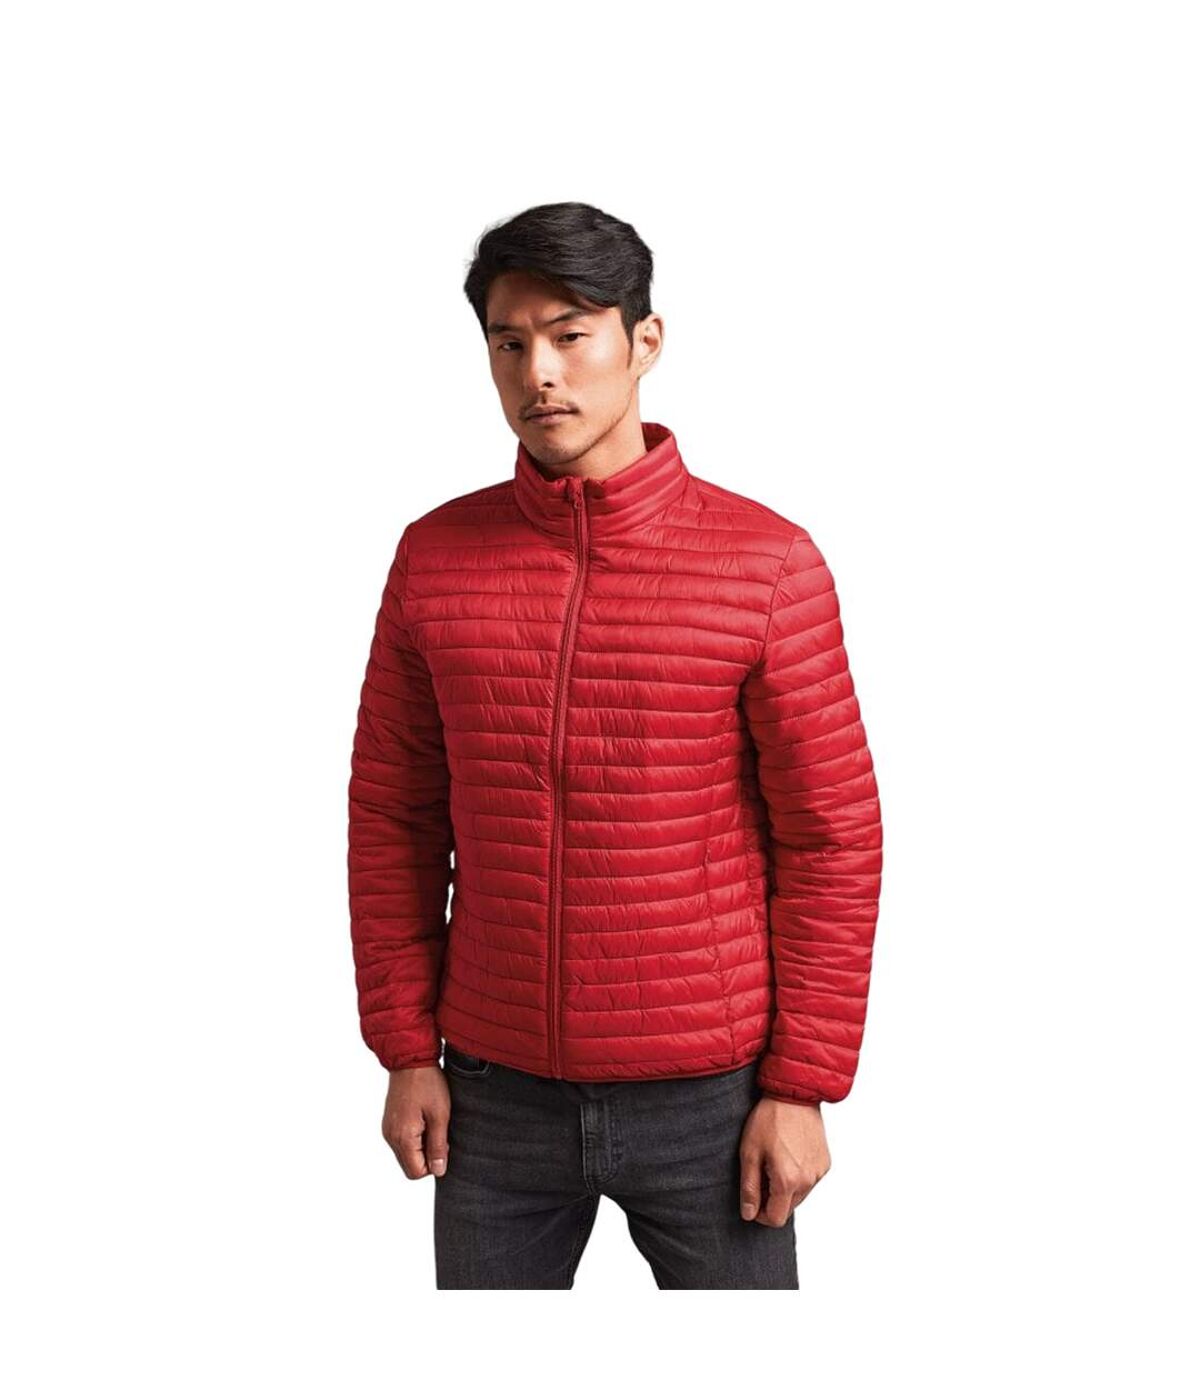 2786 Mens Tribe Fineline Padded Jacket (Red)